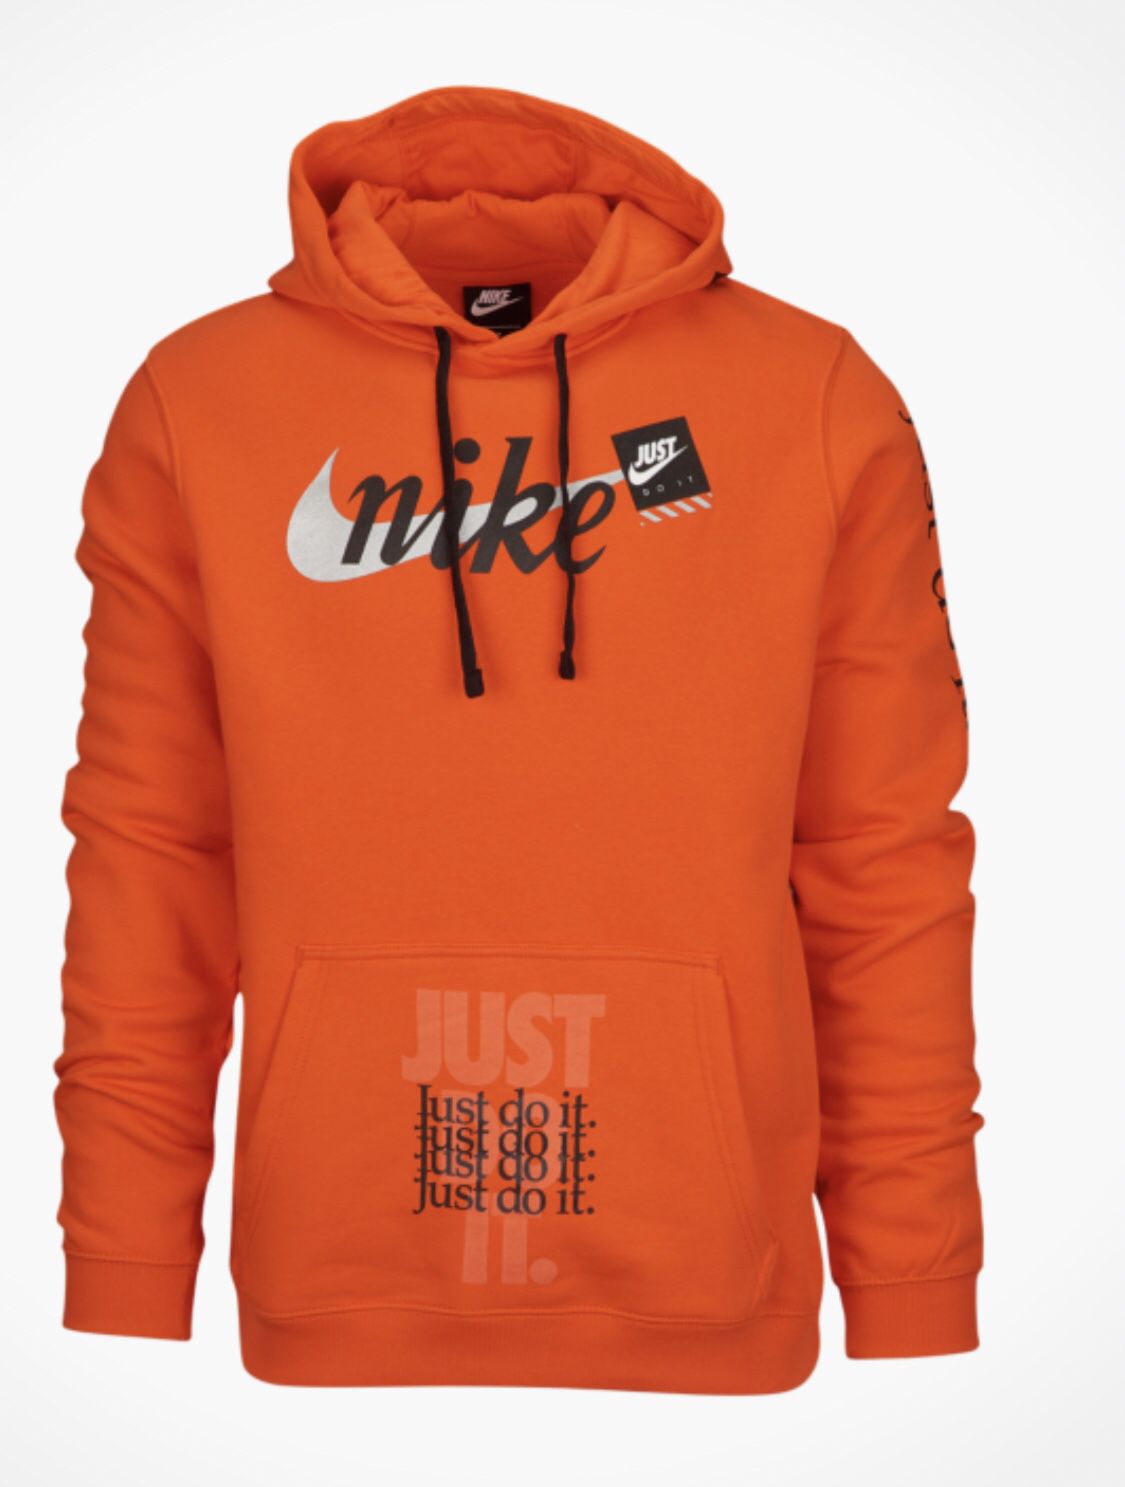 Just Do It JDI Club Hoodie Pullover Off-White Vibes Orange (Medium) for Sale in Plaines, IL - OfferUp